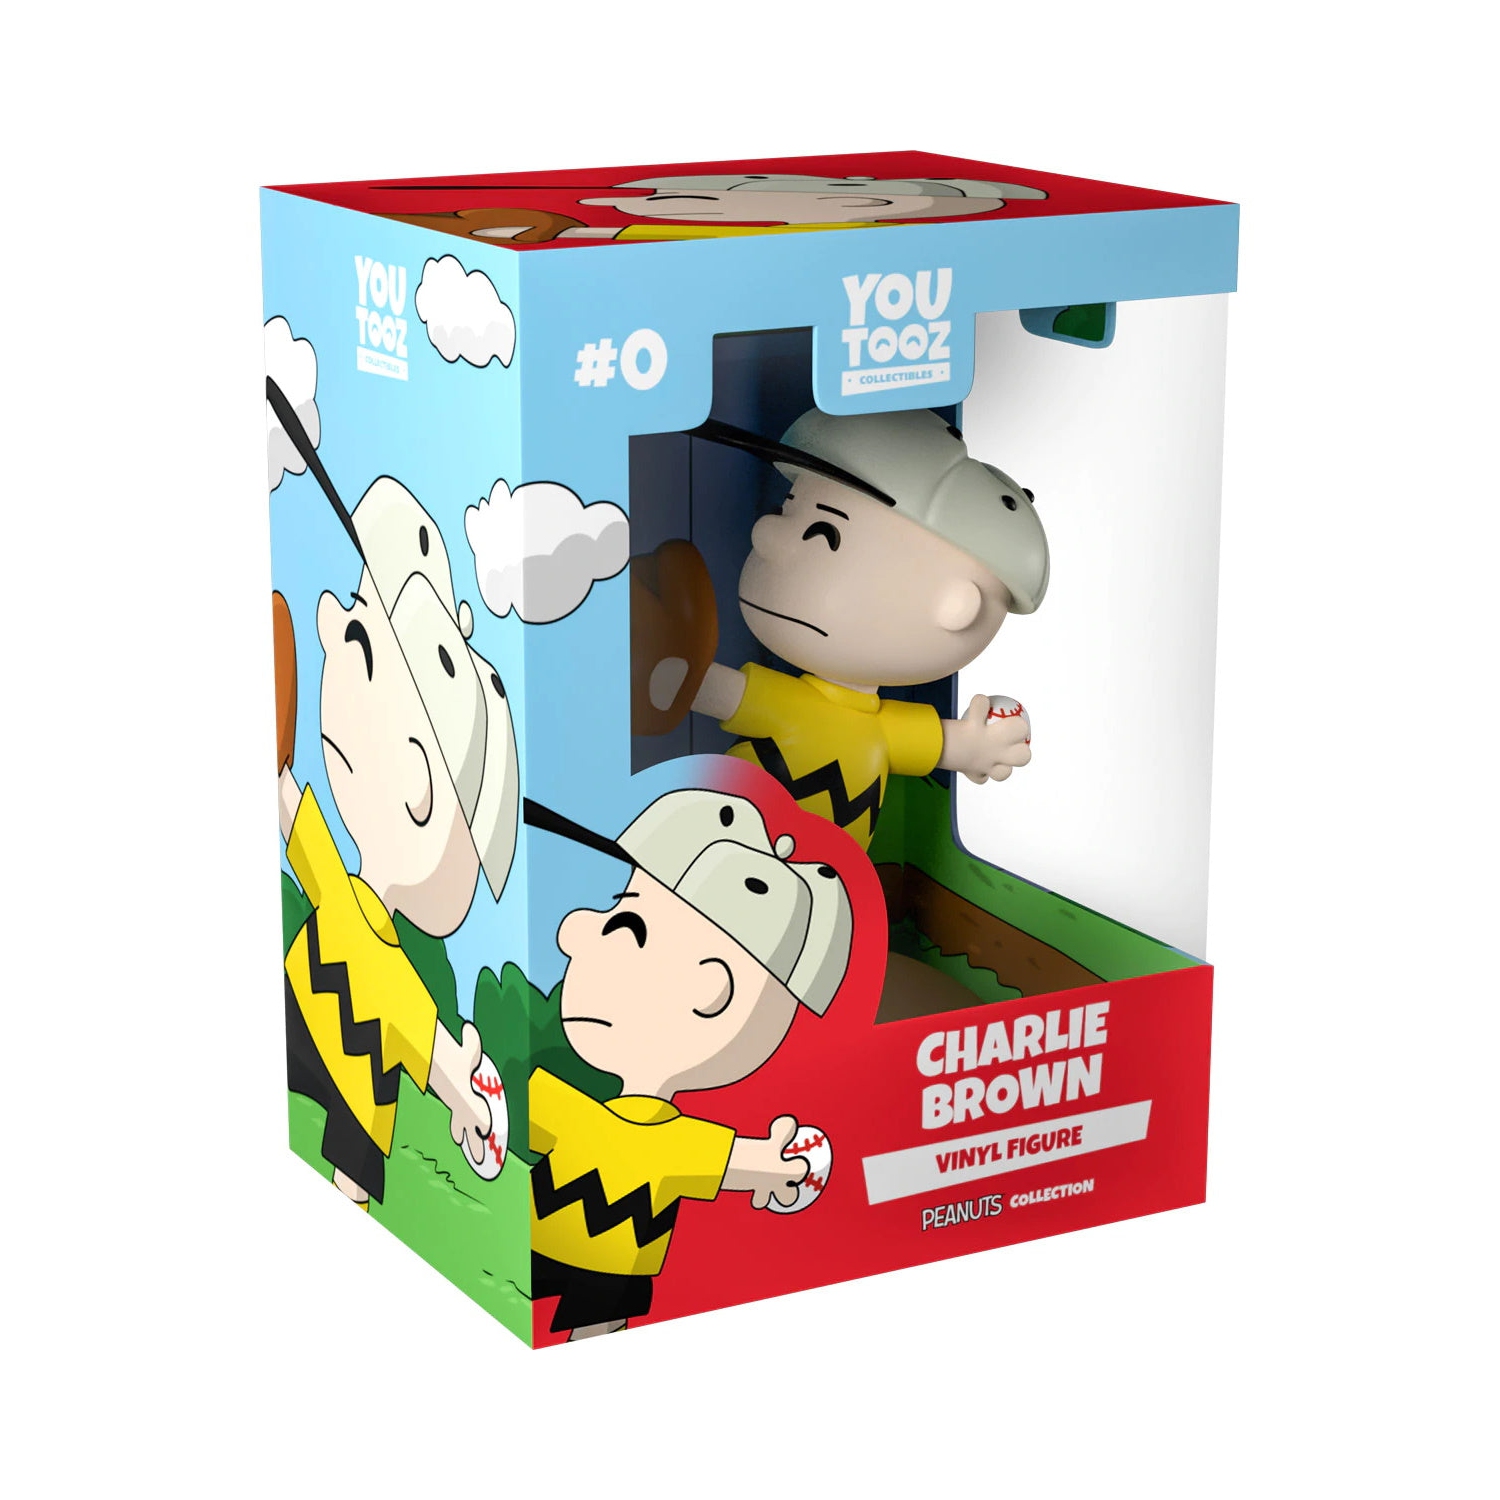 Youtooz: Peanuts Collection - Charlie Brown Vinyl Figure [Toys, Ages 15+, #0]